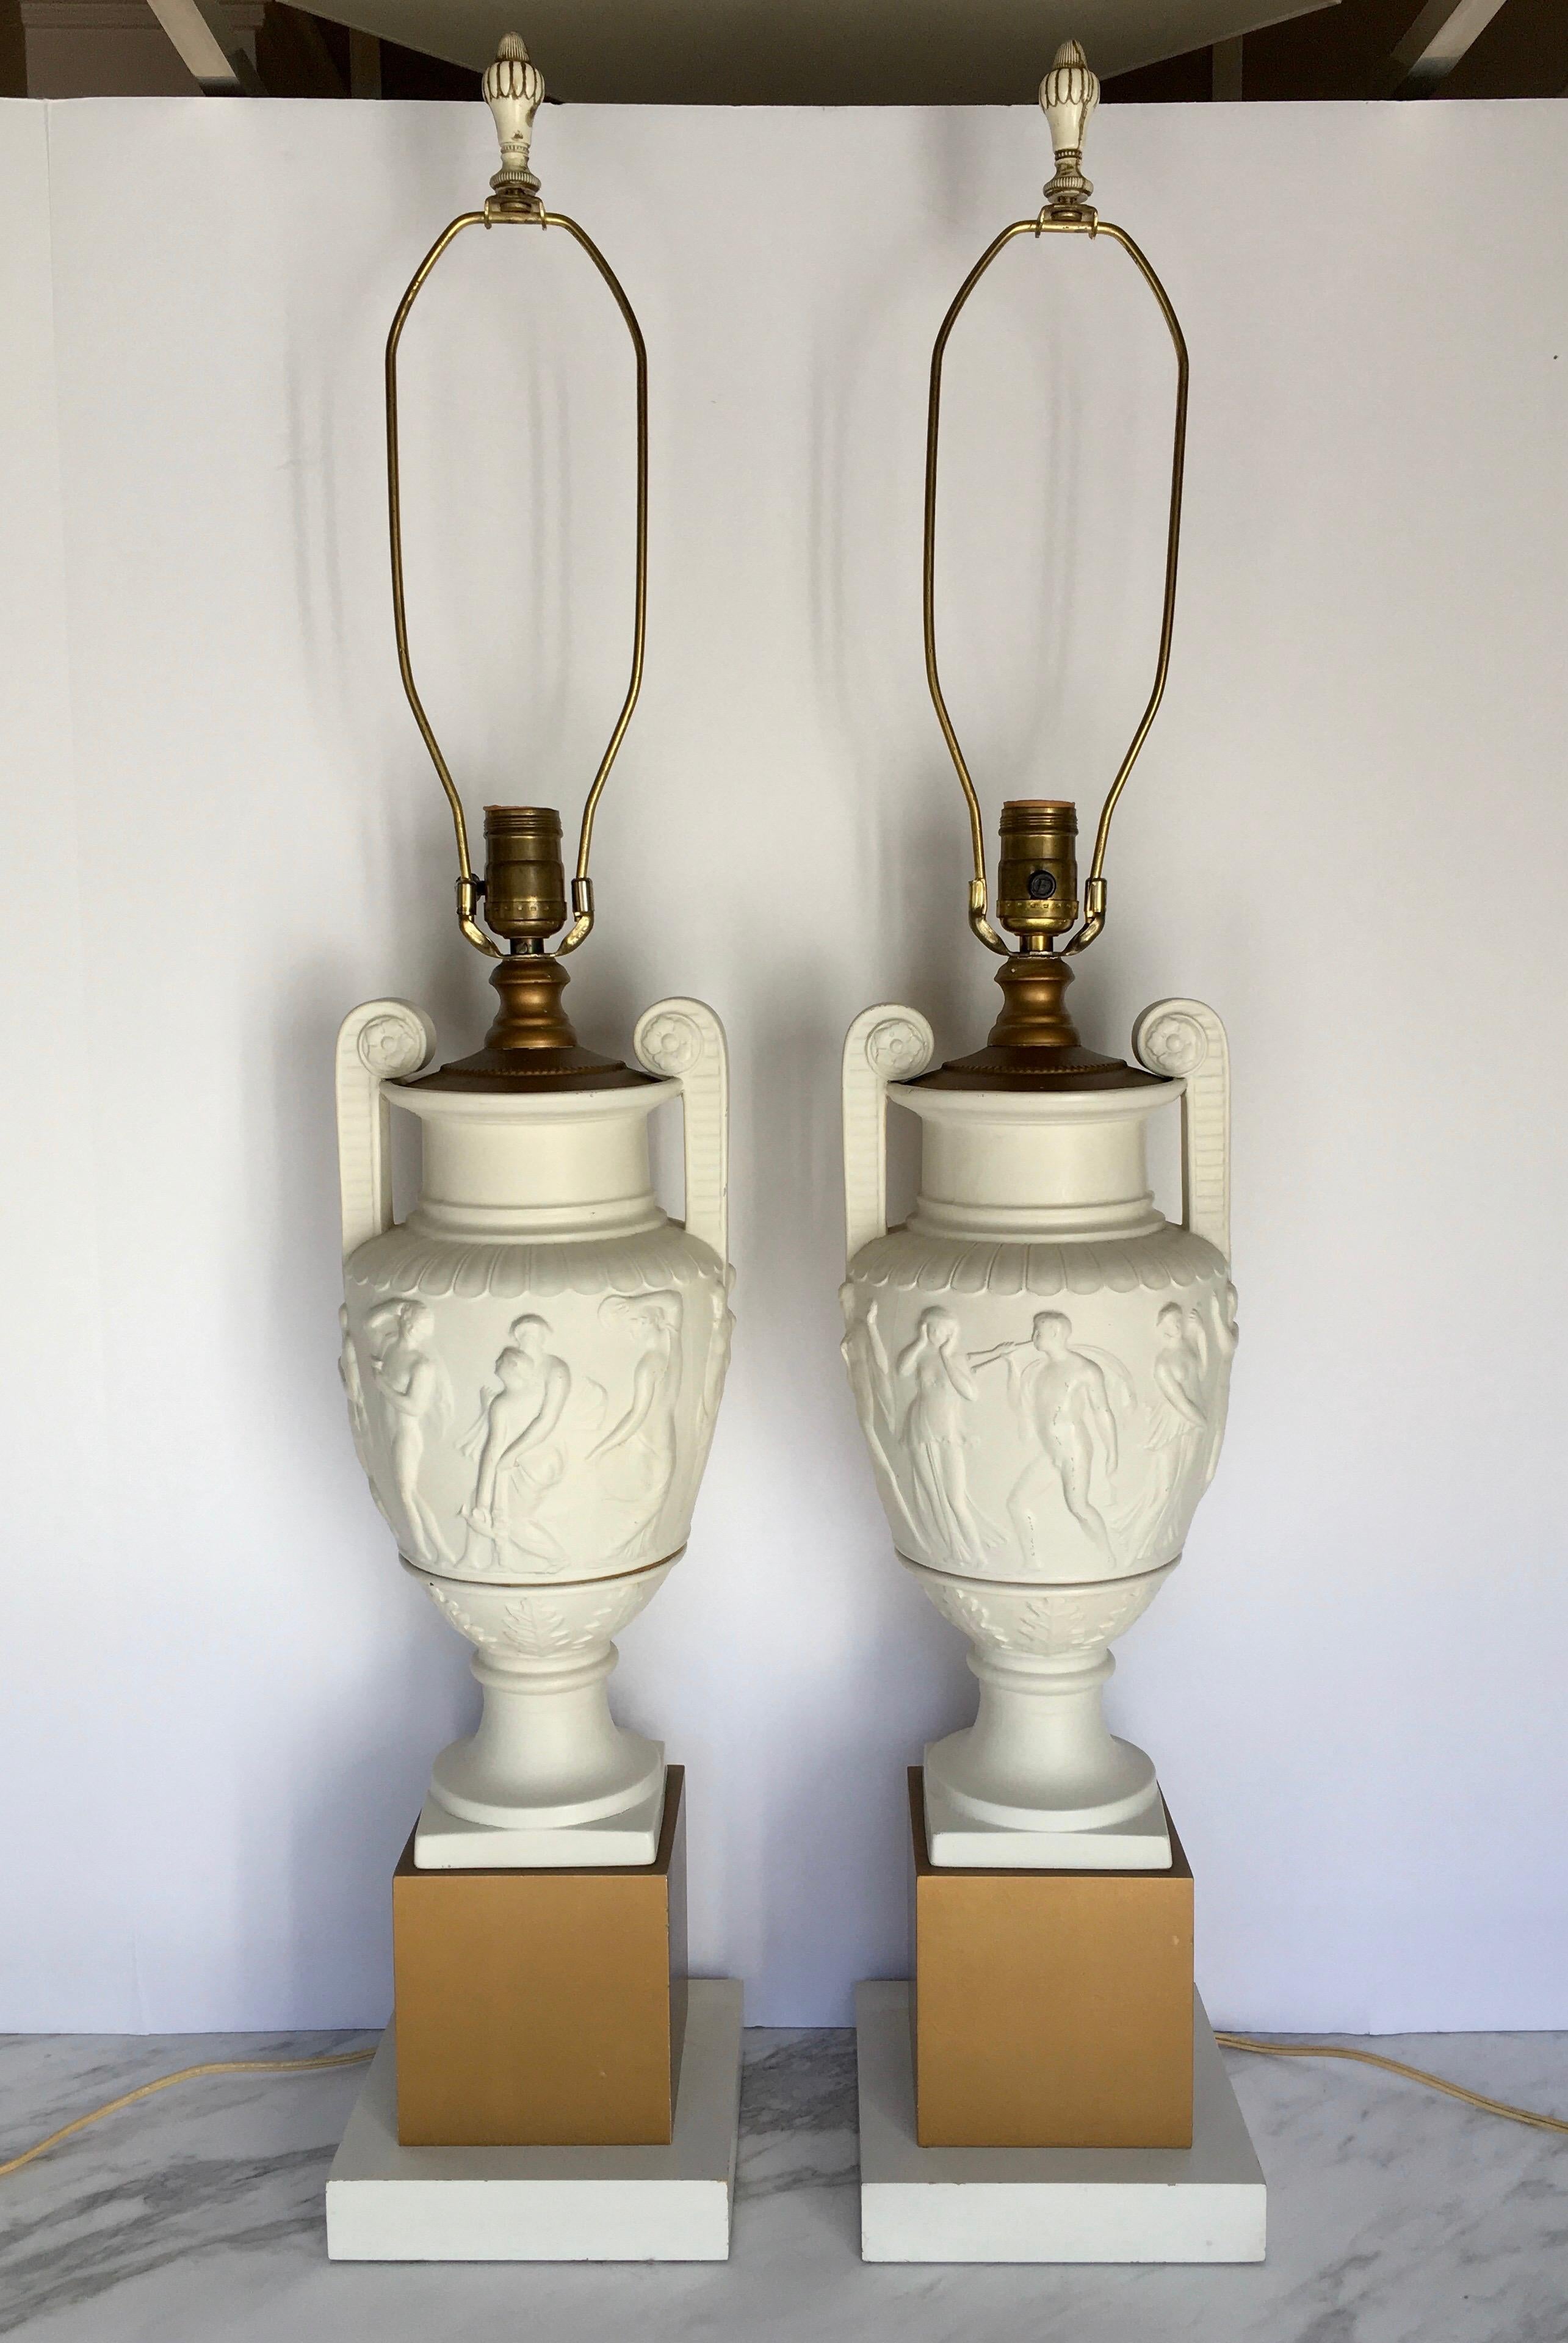 Pair of neoclassical style ceramic and wood urn table lamps mounted on square plinth gold wood bases. Plaster-like matte cream handled urns feature sculptural relief figures. Lamp shades not included. 

Measures: Height to harp: 35.5